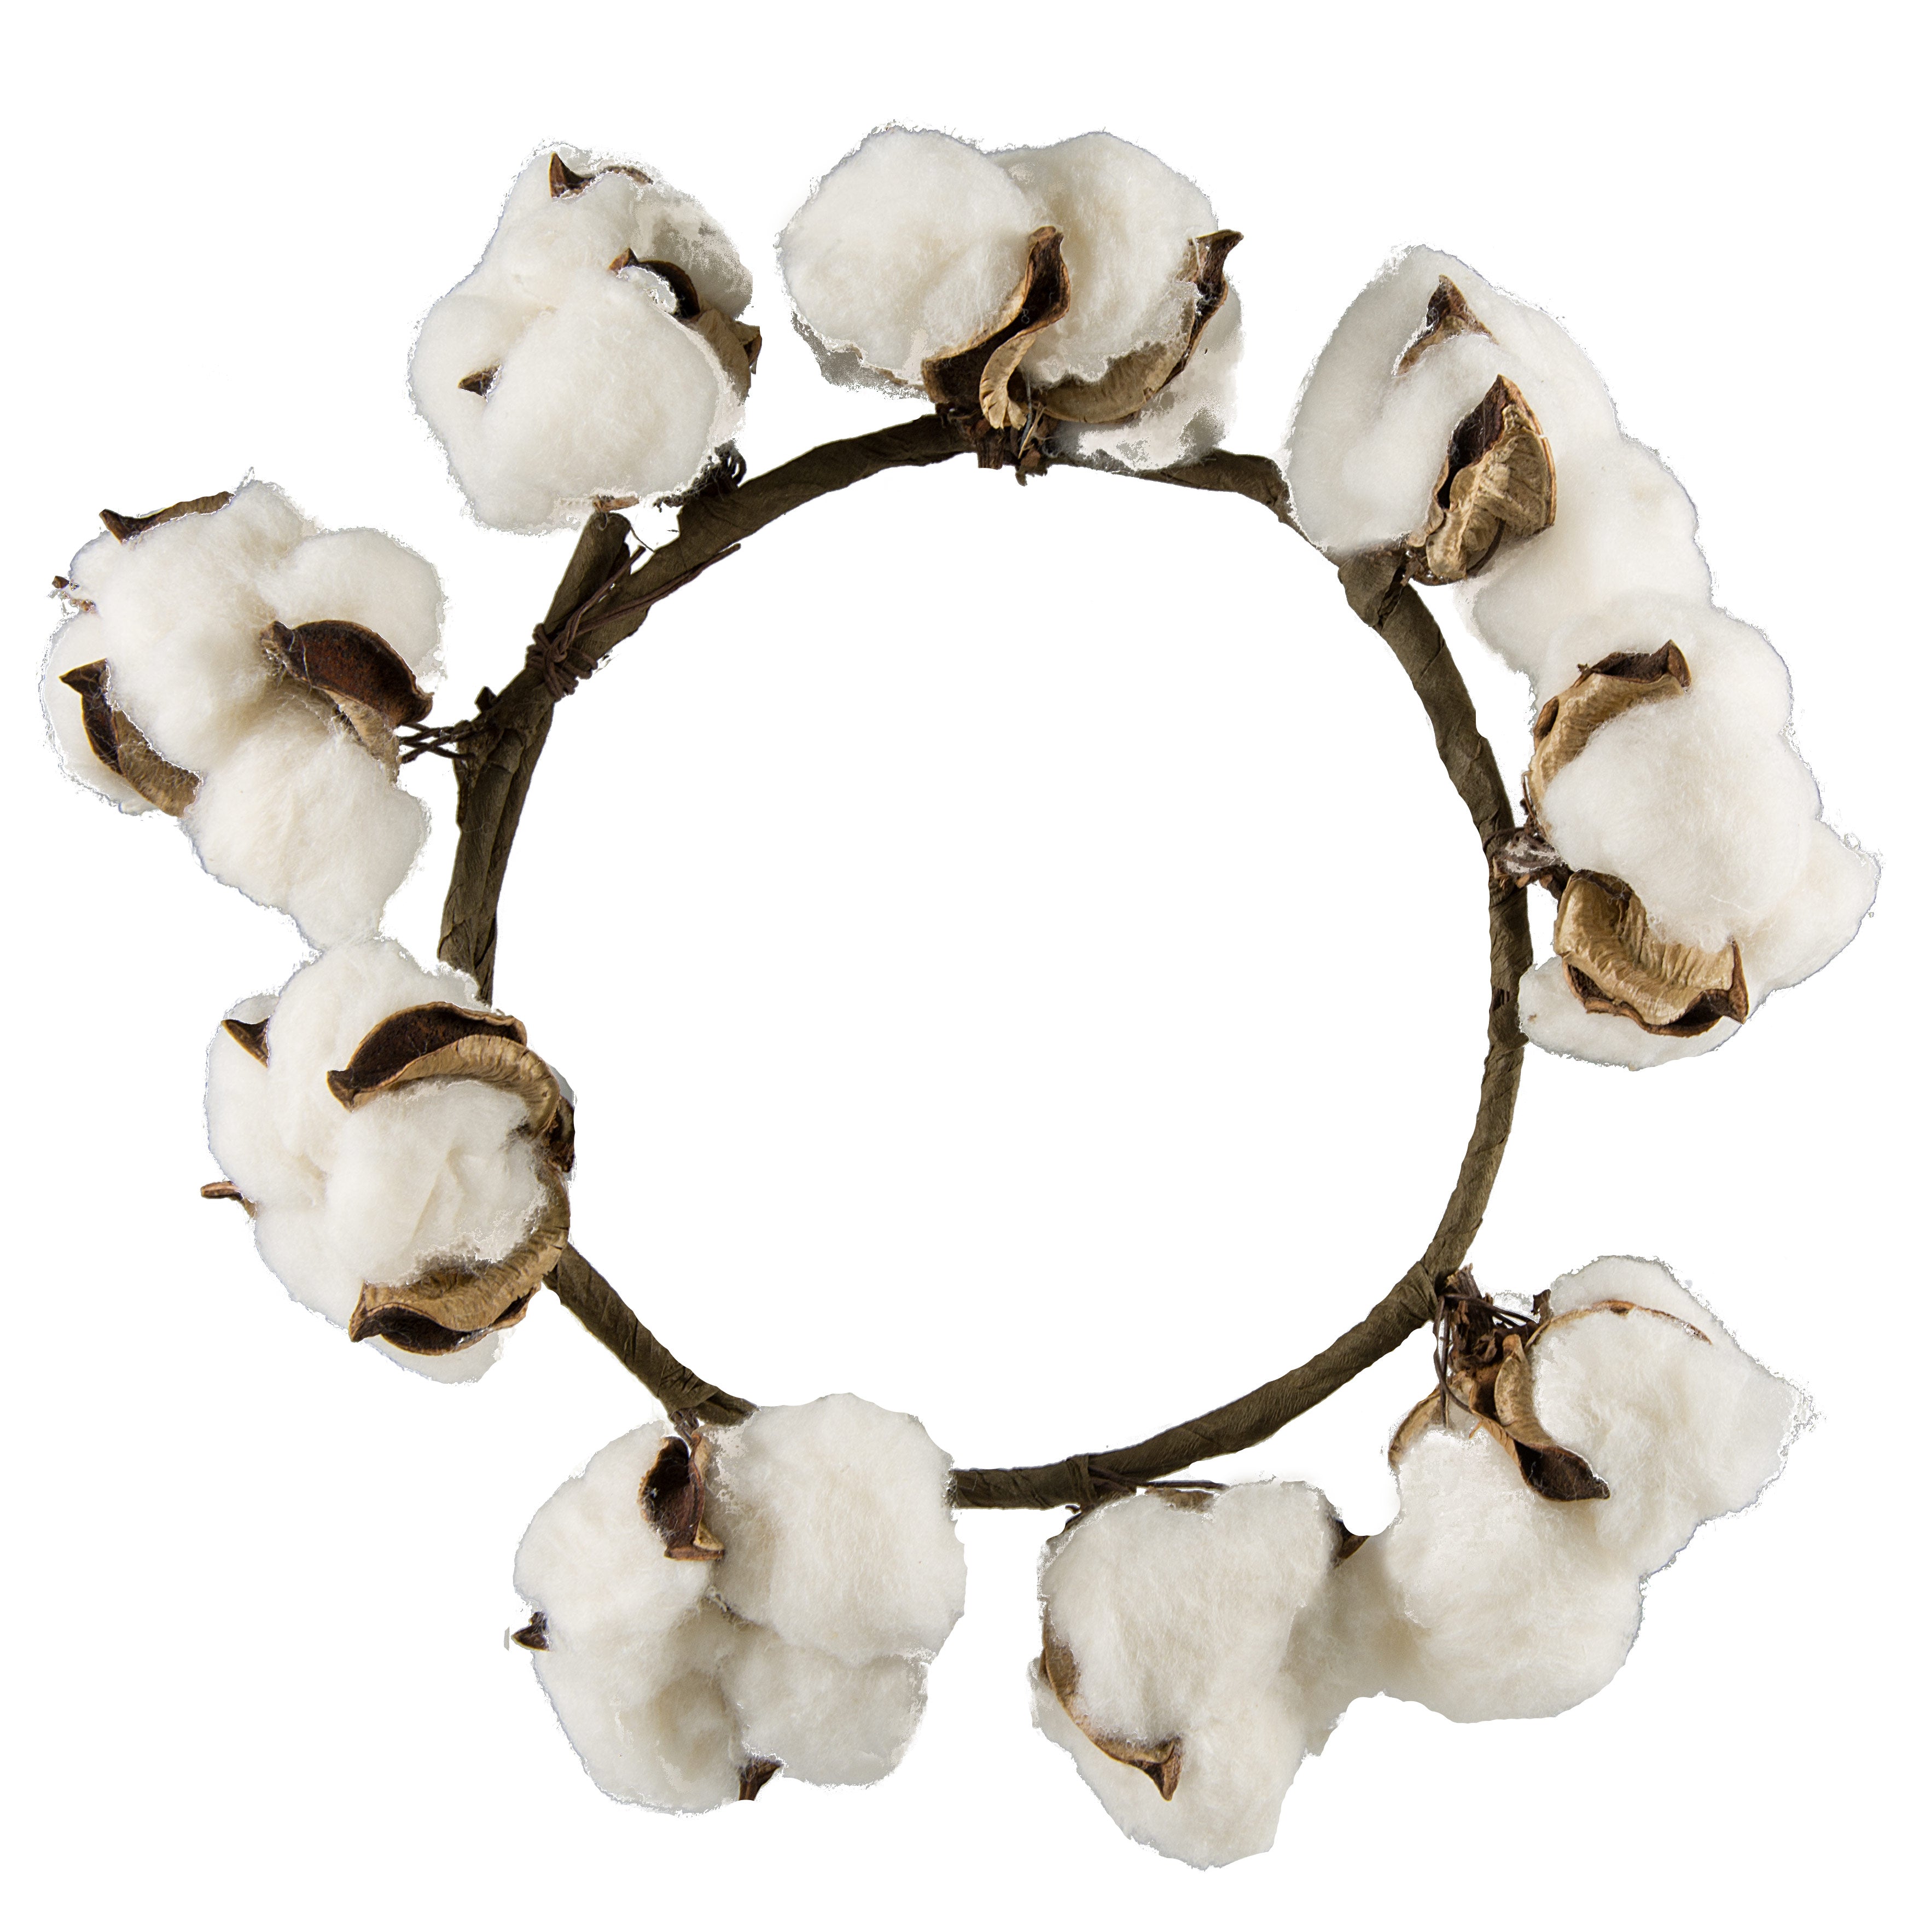 5" Cotton Boll Candle Ring